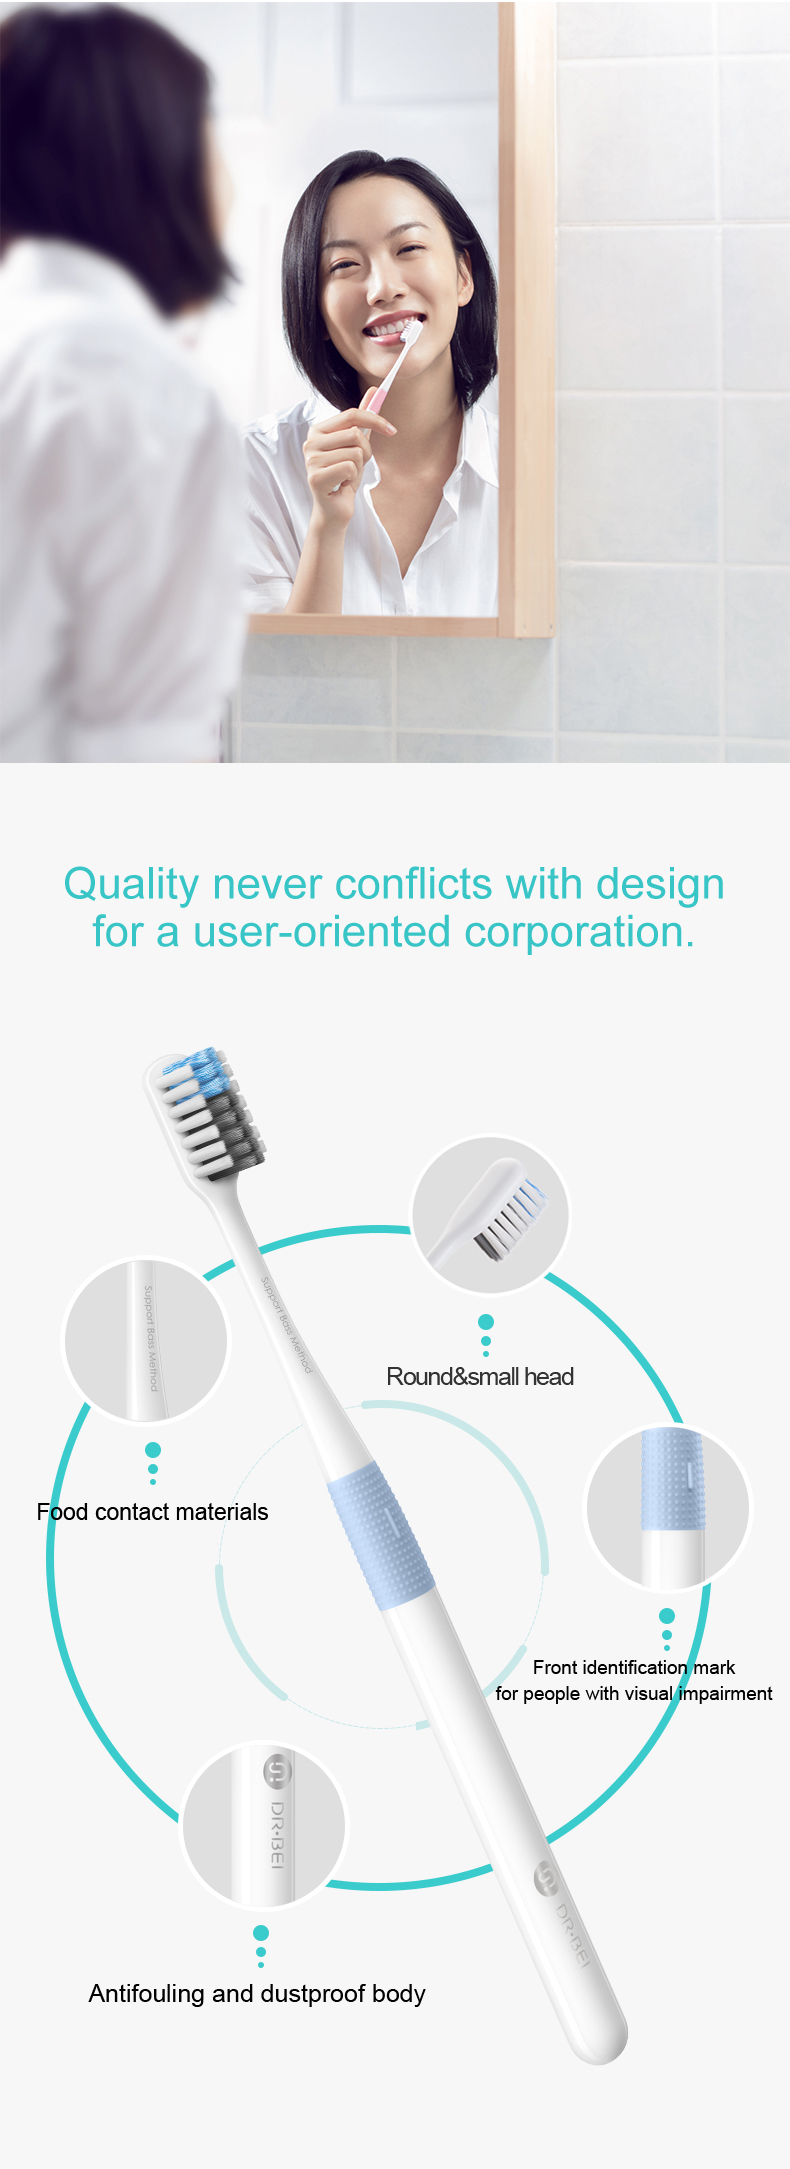 DR.BEI Bass Toothbrush, 4 Pieces (Original) Xiaomi Youpin DR.BEI Bass Soft Toothbrush Portable 4 Colors Tooth Brush With Nano Ultra-fine Bristles Wave Flat Teeth Head Travel Outdoor